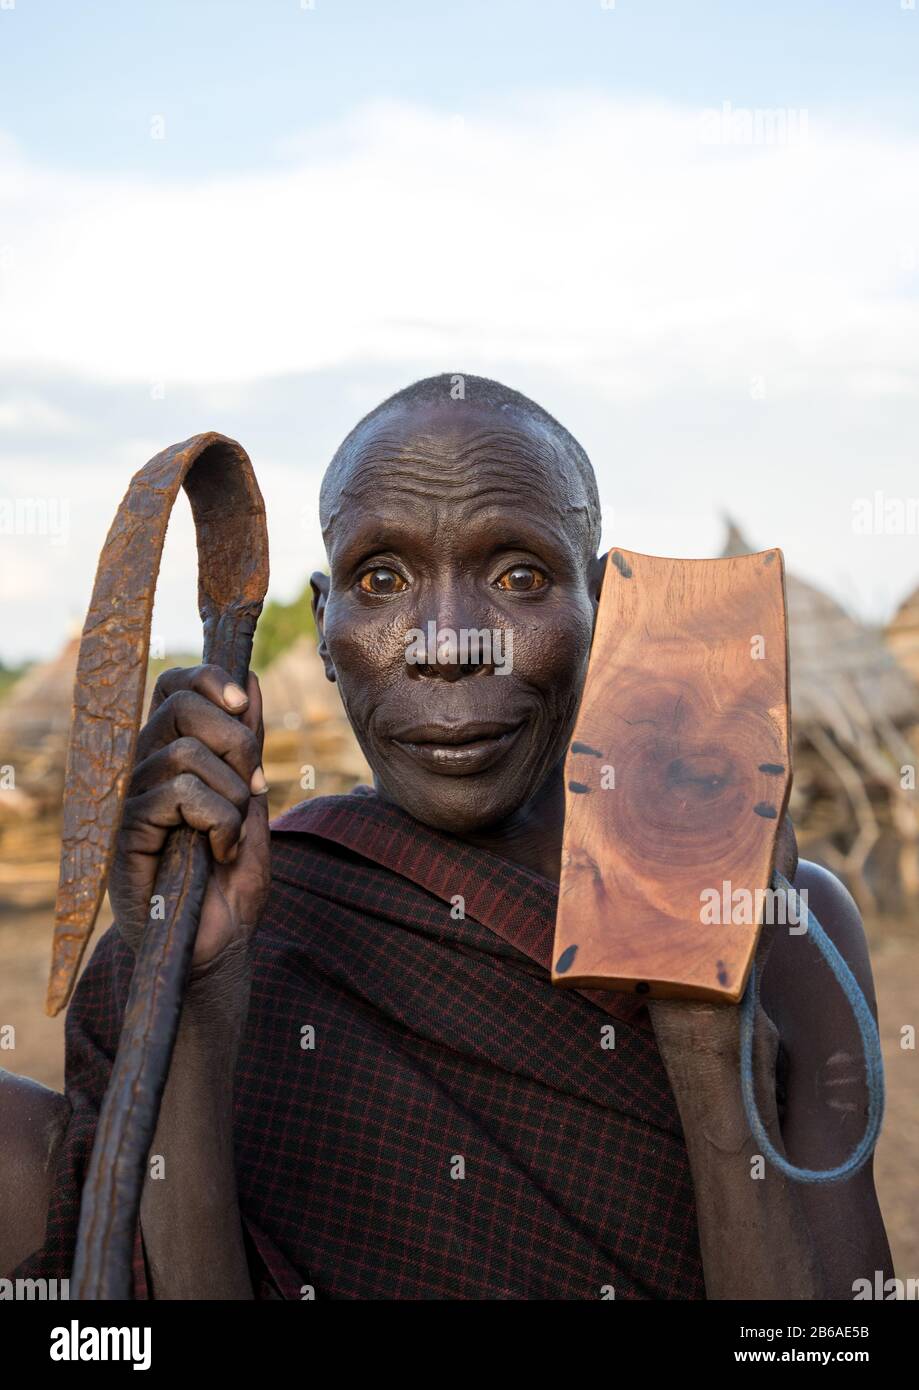 Portrait of a Toposa tribe man holding a whip and a wooden seat, Namorunyang State, Kapoeta, South Sudan Stock Photo